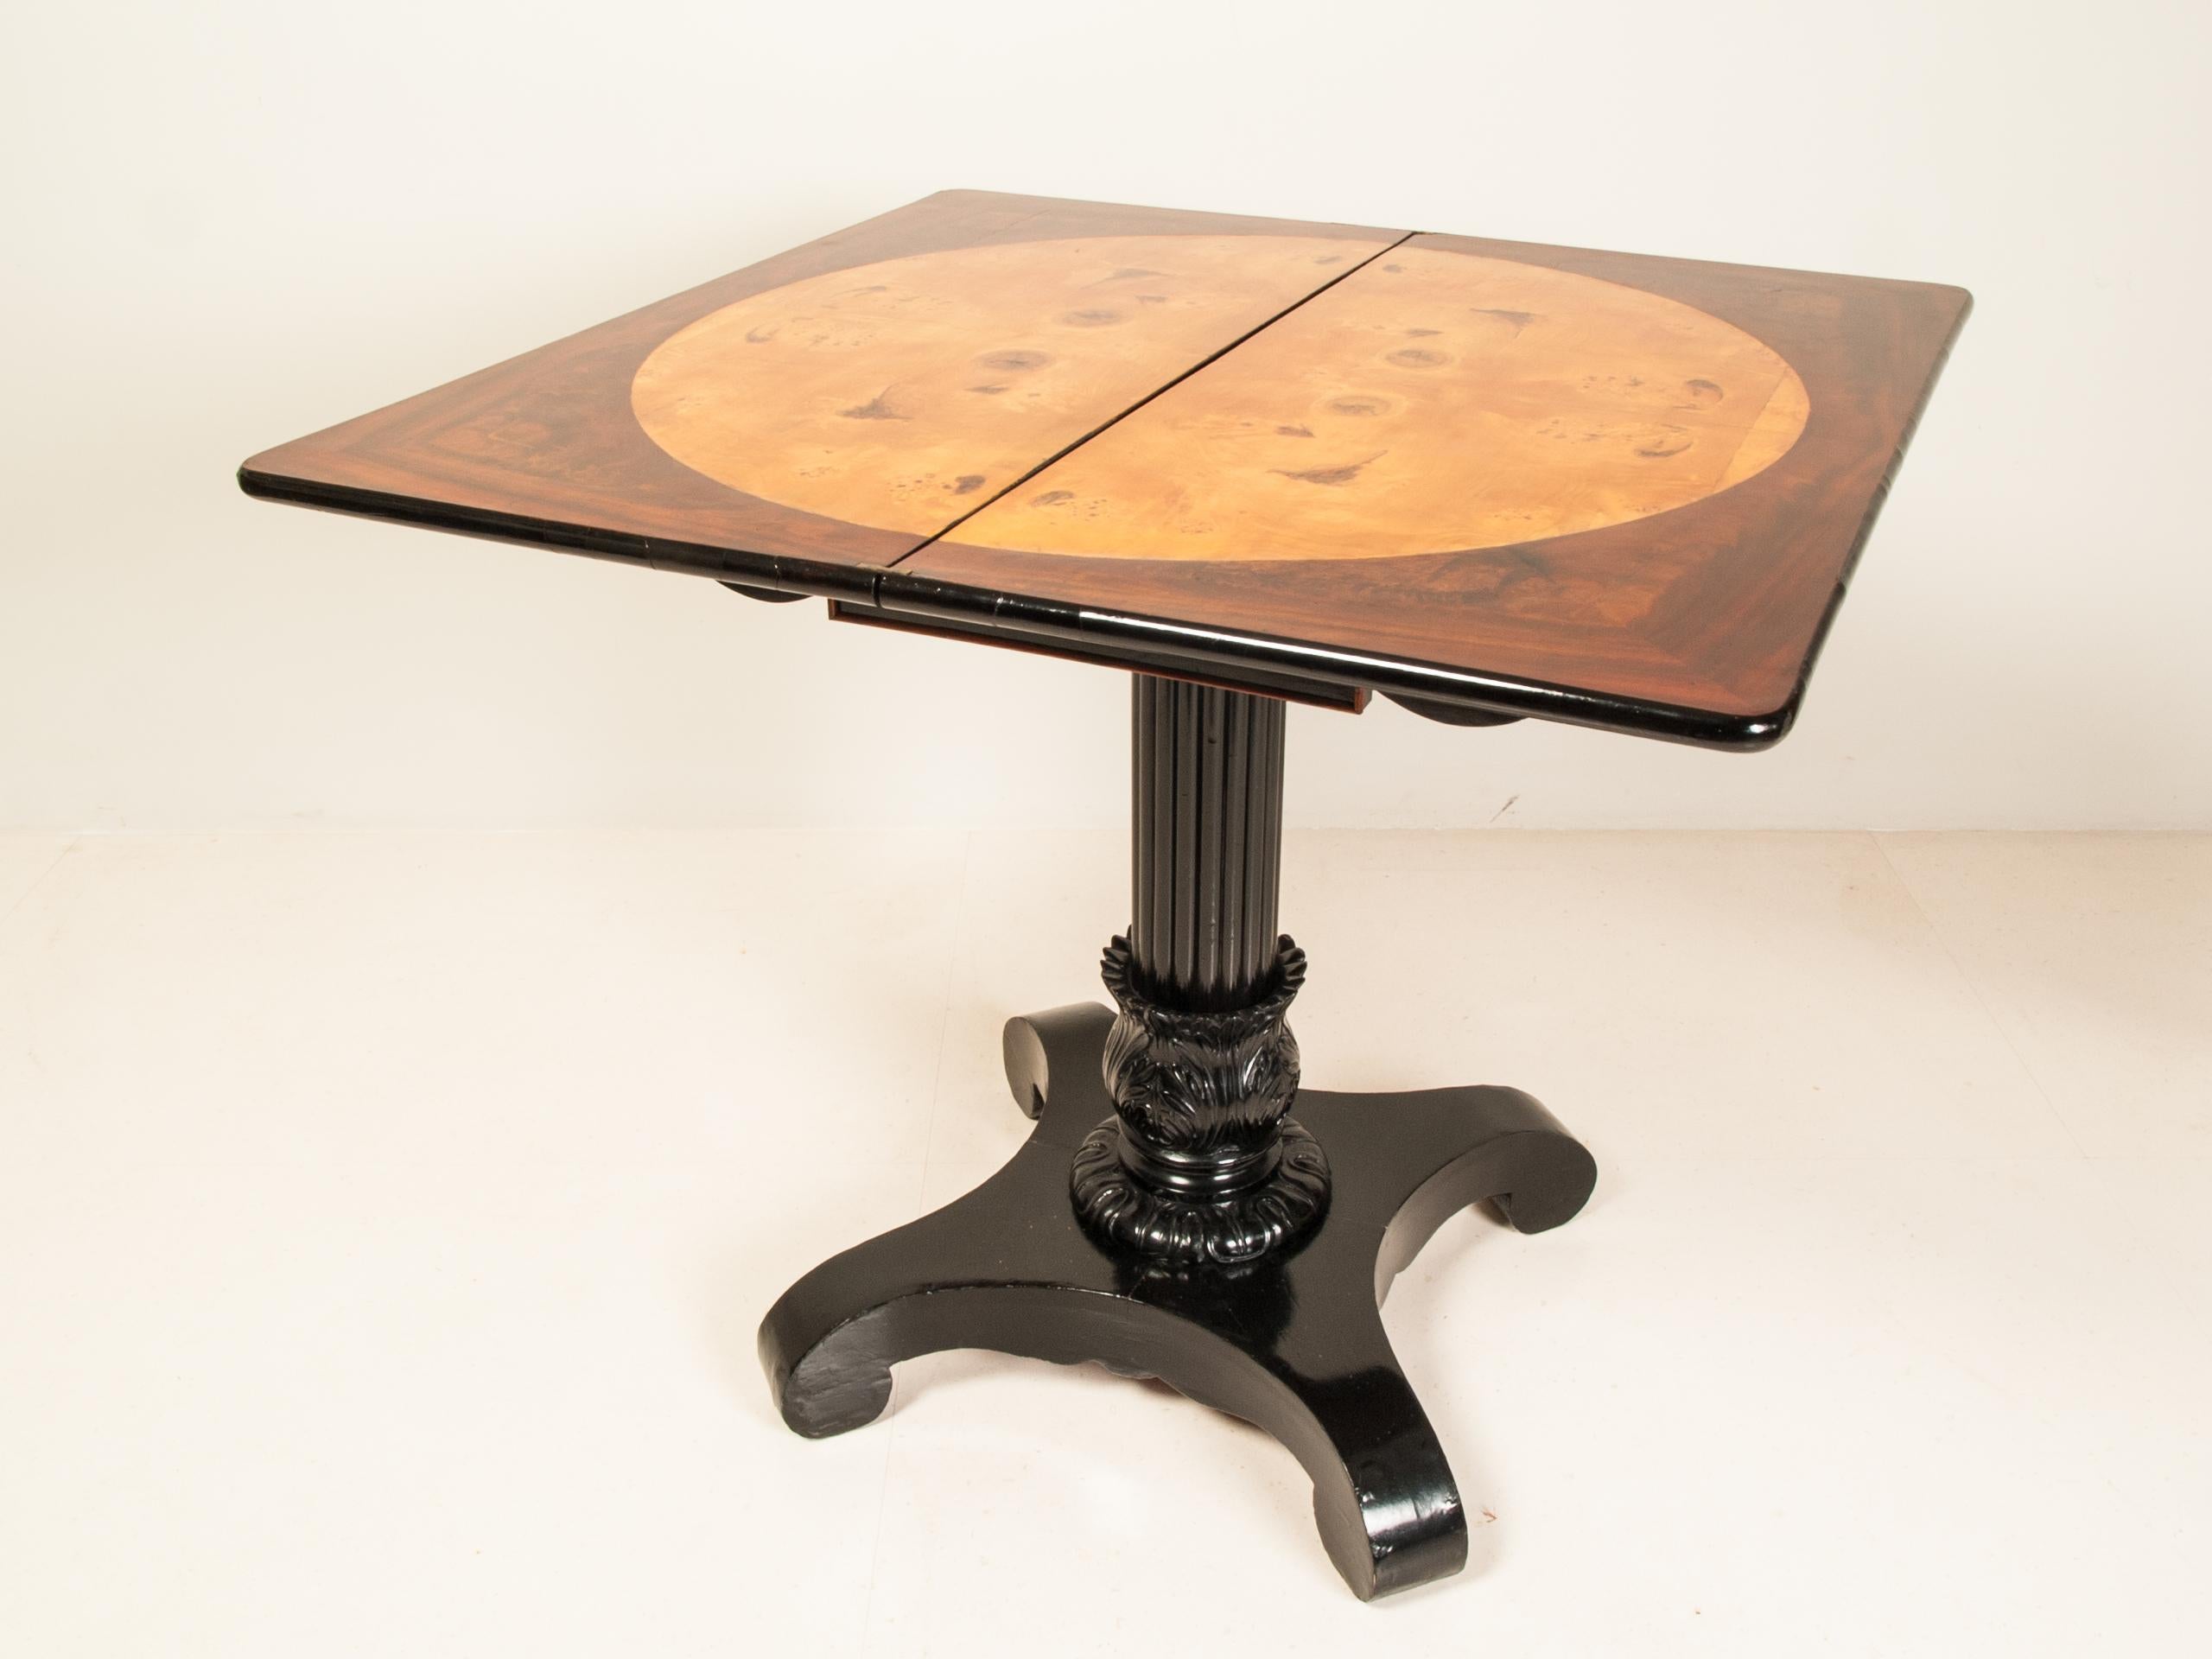 German Biedermeier period ebonized fold-over game or console table, the guttered column stands on a four-legged foot base. Playing surface is veneered in poplar veneer.